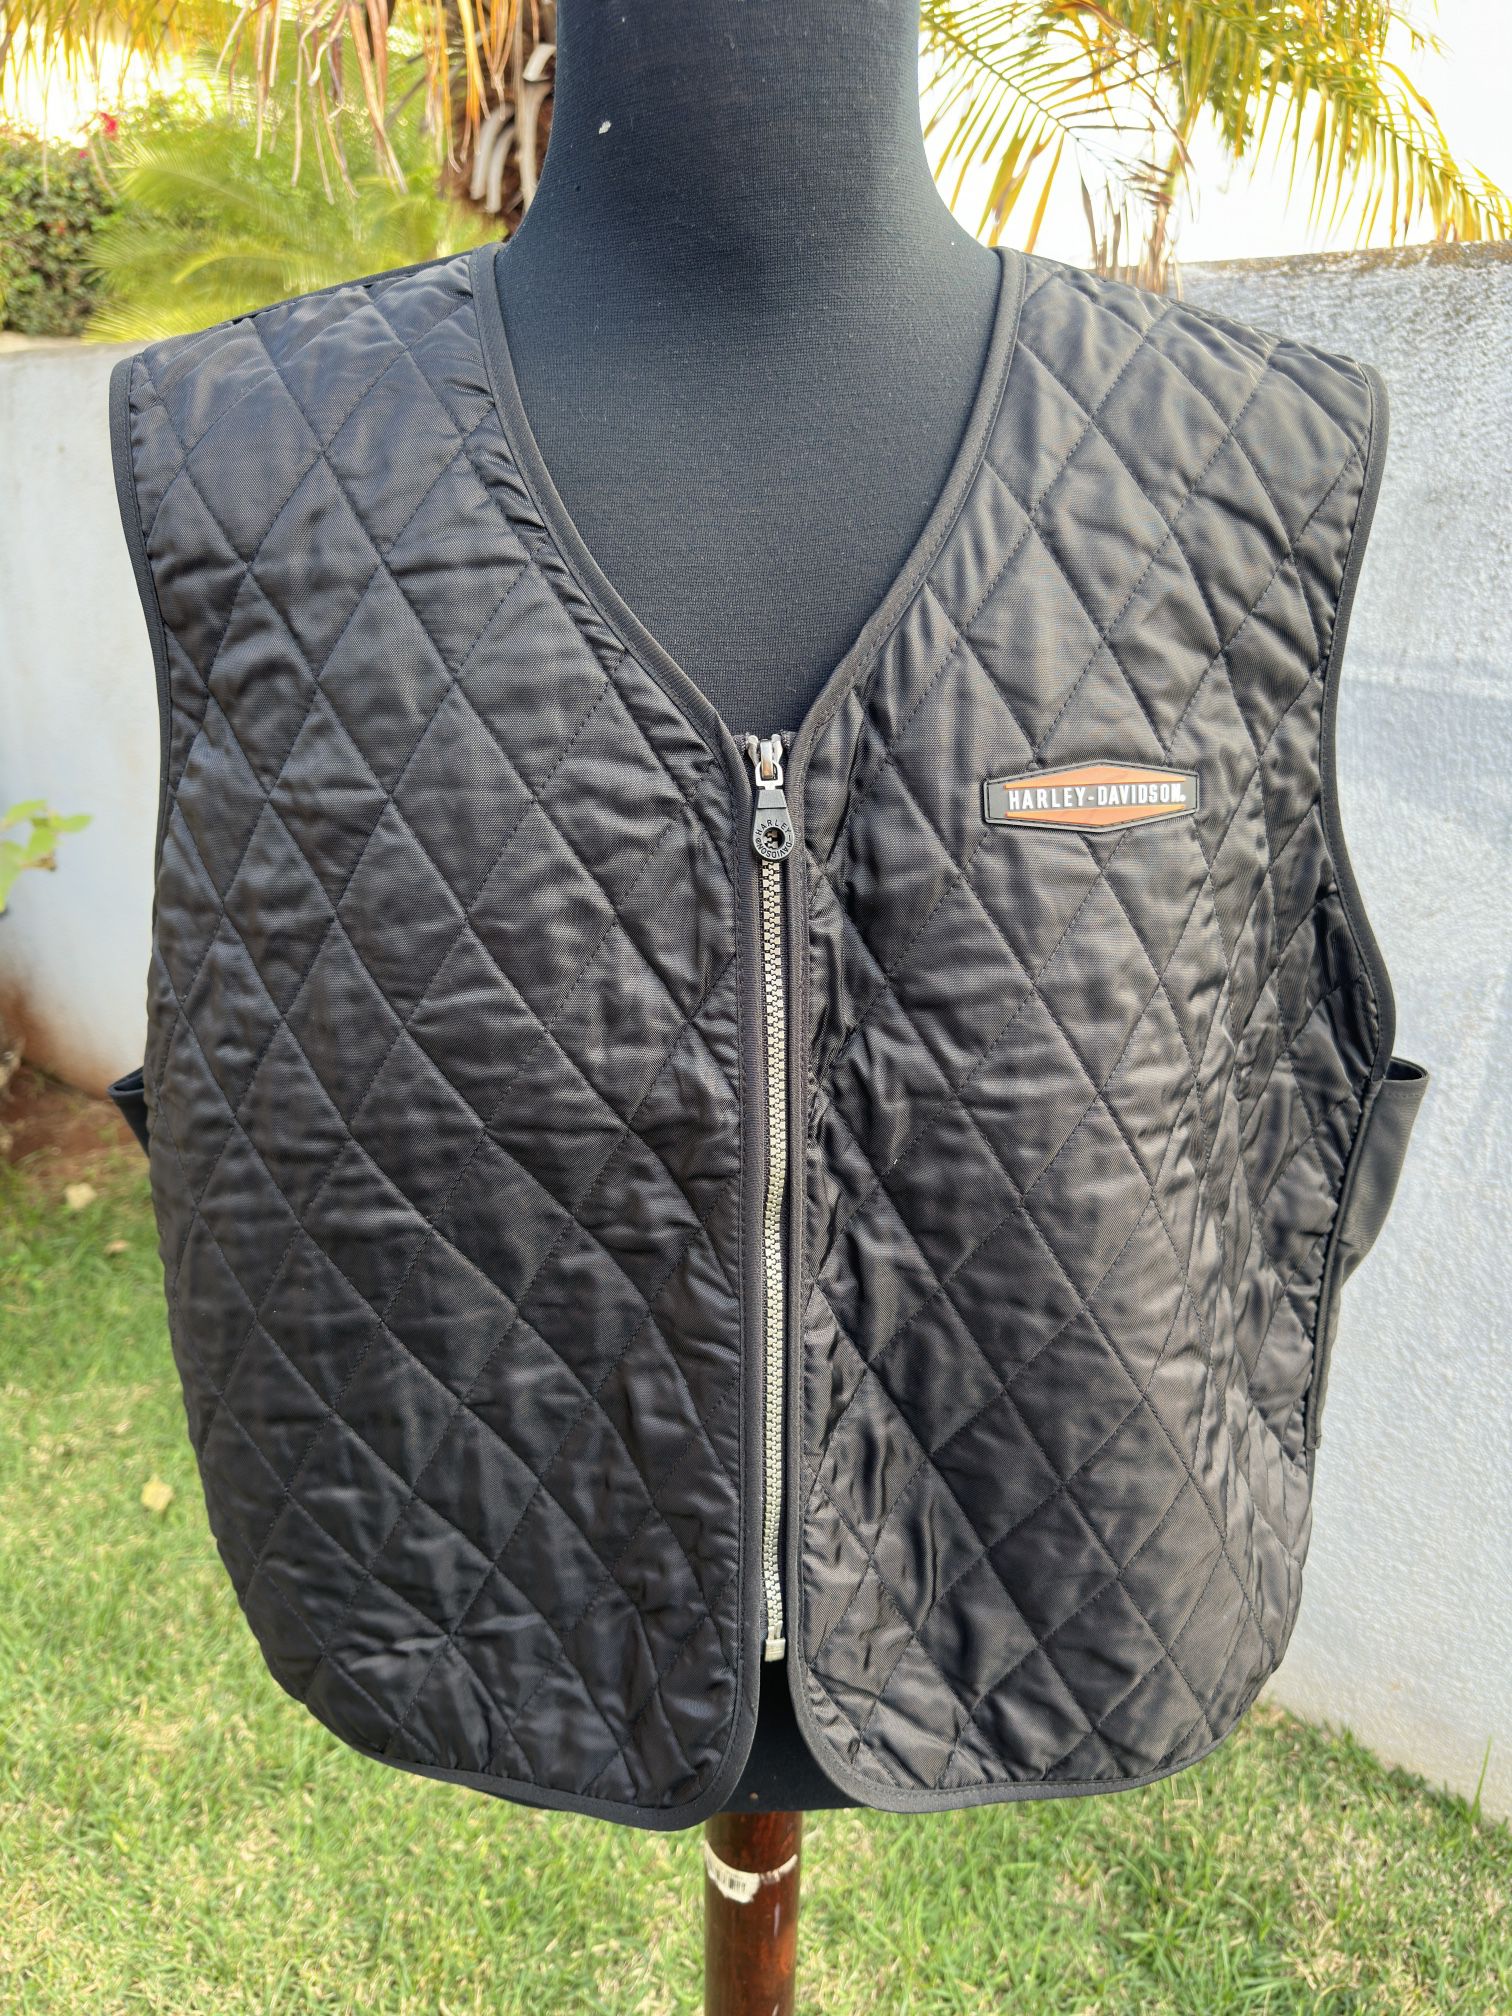 PreOwned Harley Davidson Vest Men's 3XL Black Full Zip  Quilted Motorcycle Gear